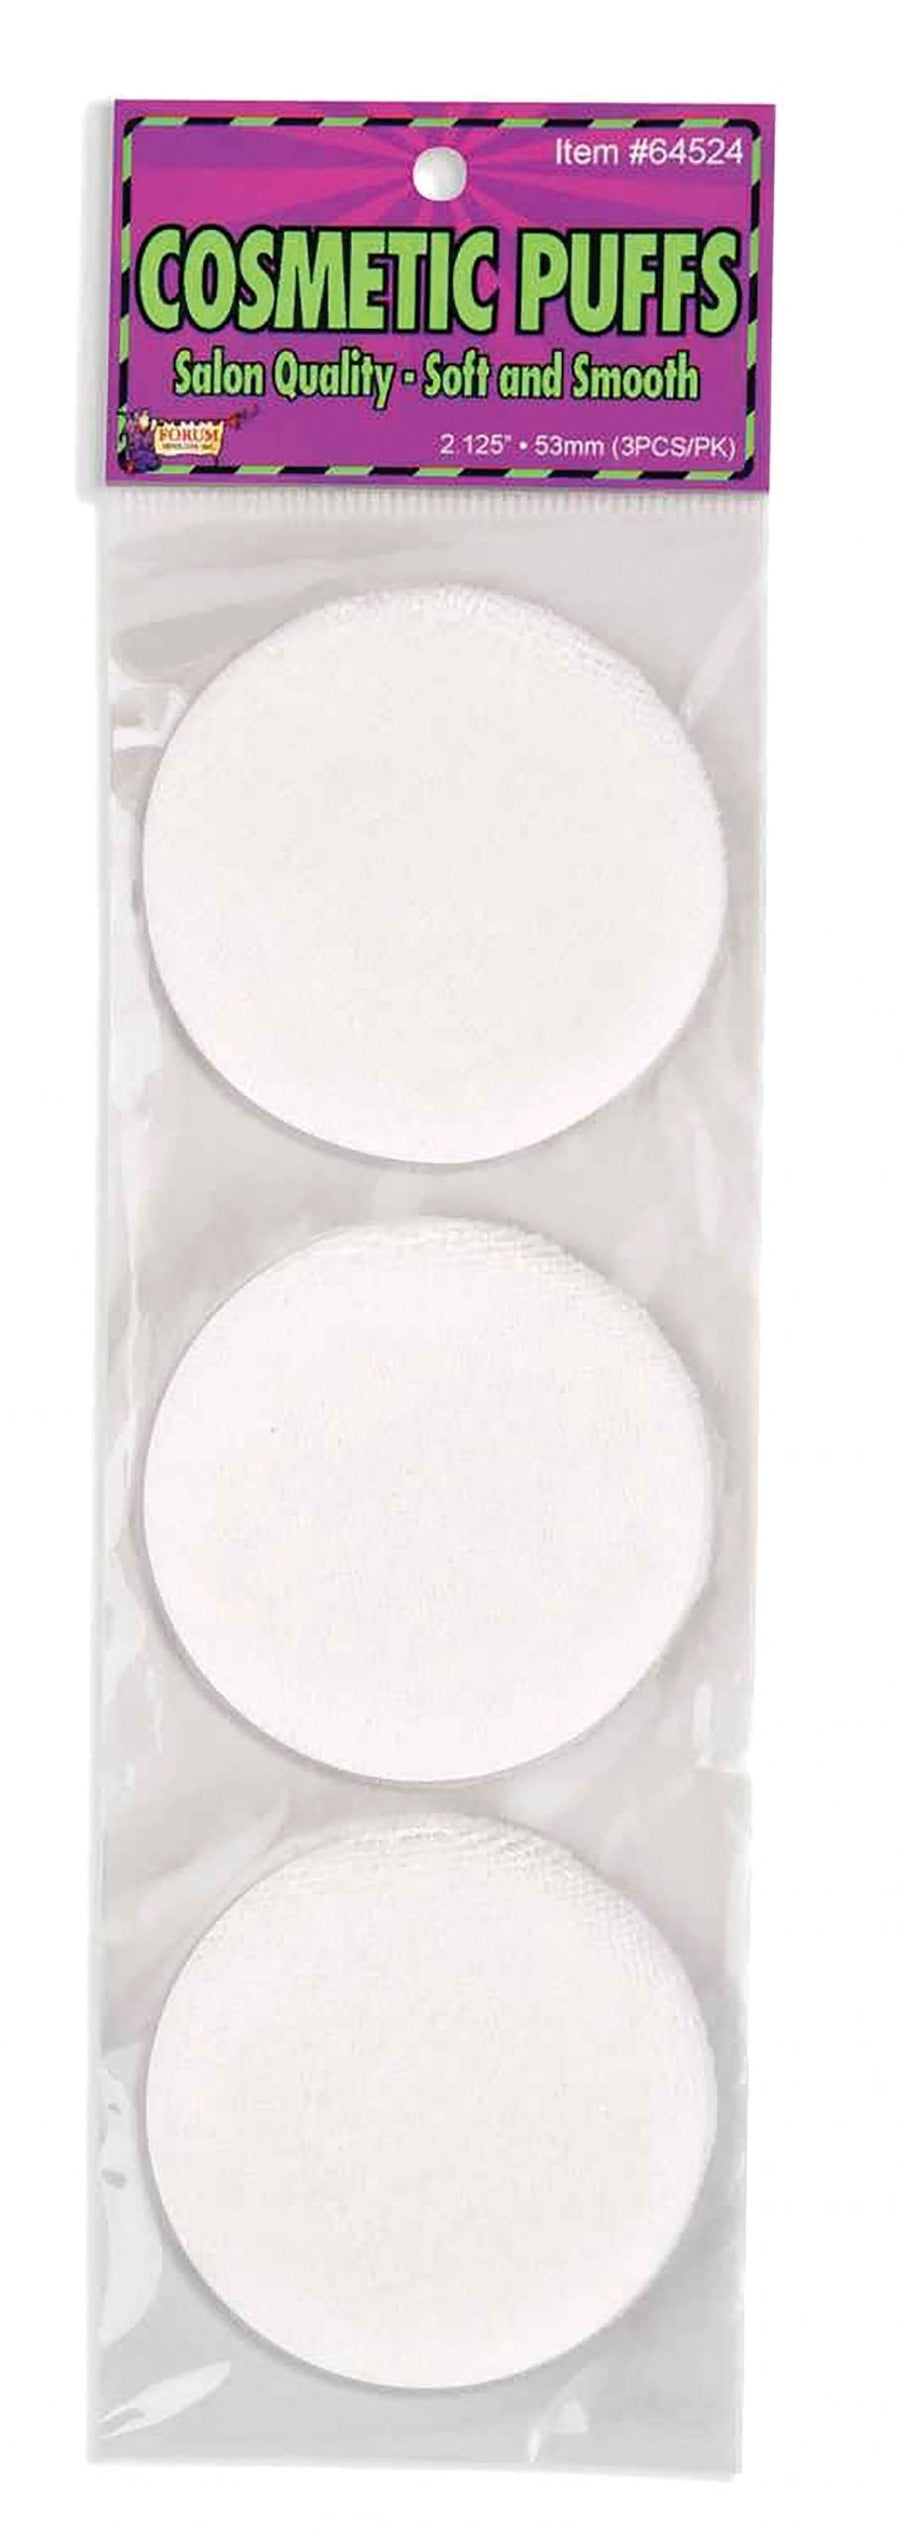 Cosmetic Puffs 3 In Pkt White Make Up Unisex_1